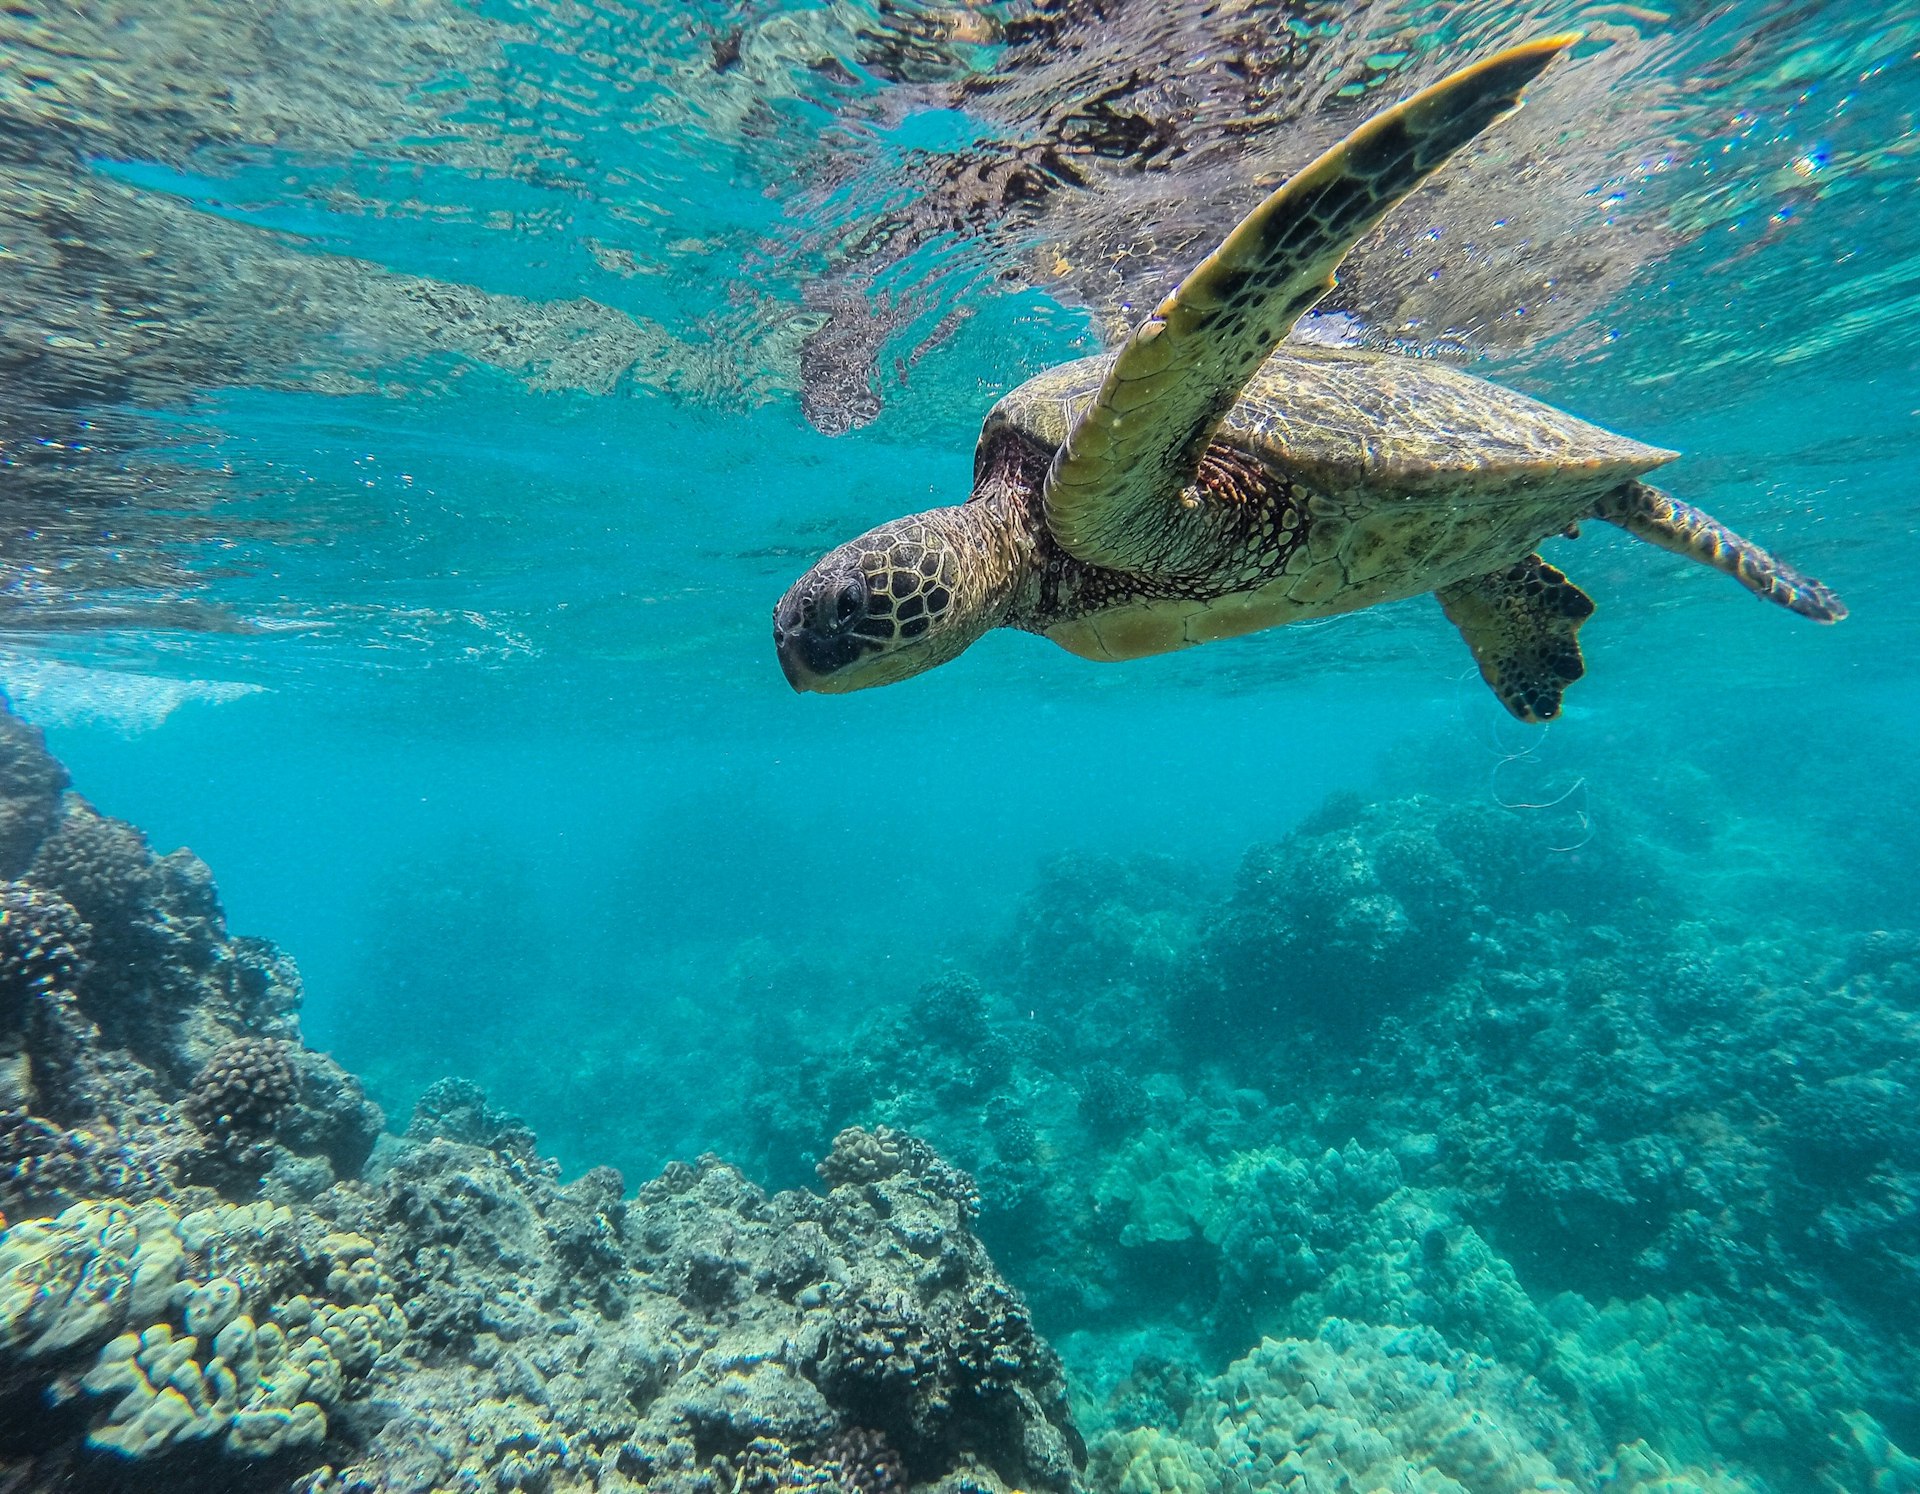 A sea turtle swims in a sapphire blue sea surrounded by coral; Maui sites without tourists